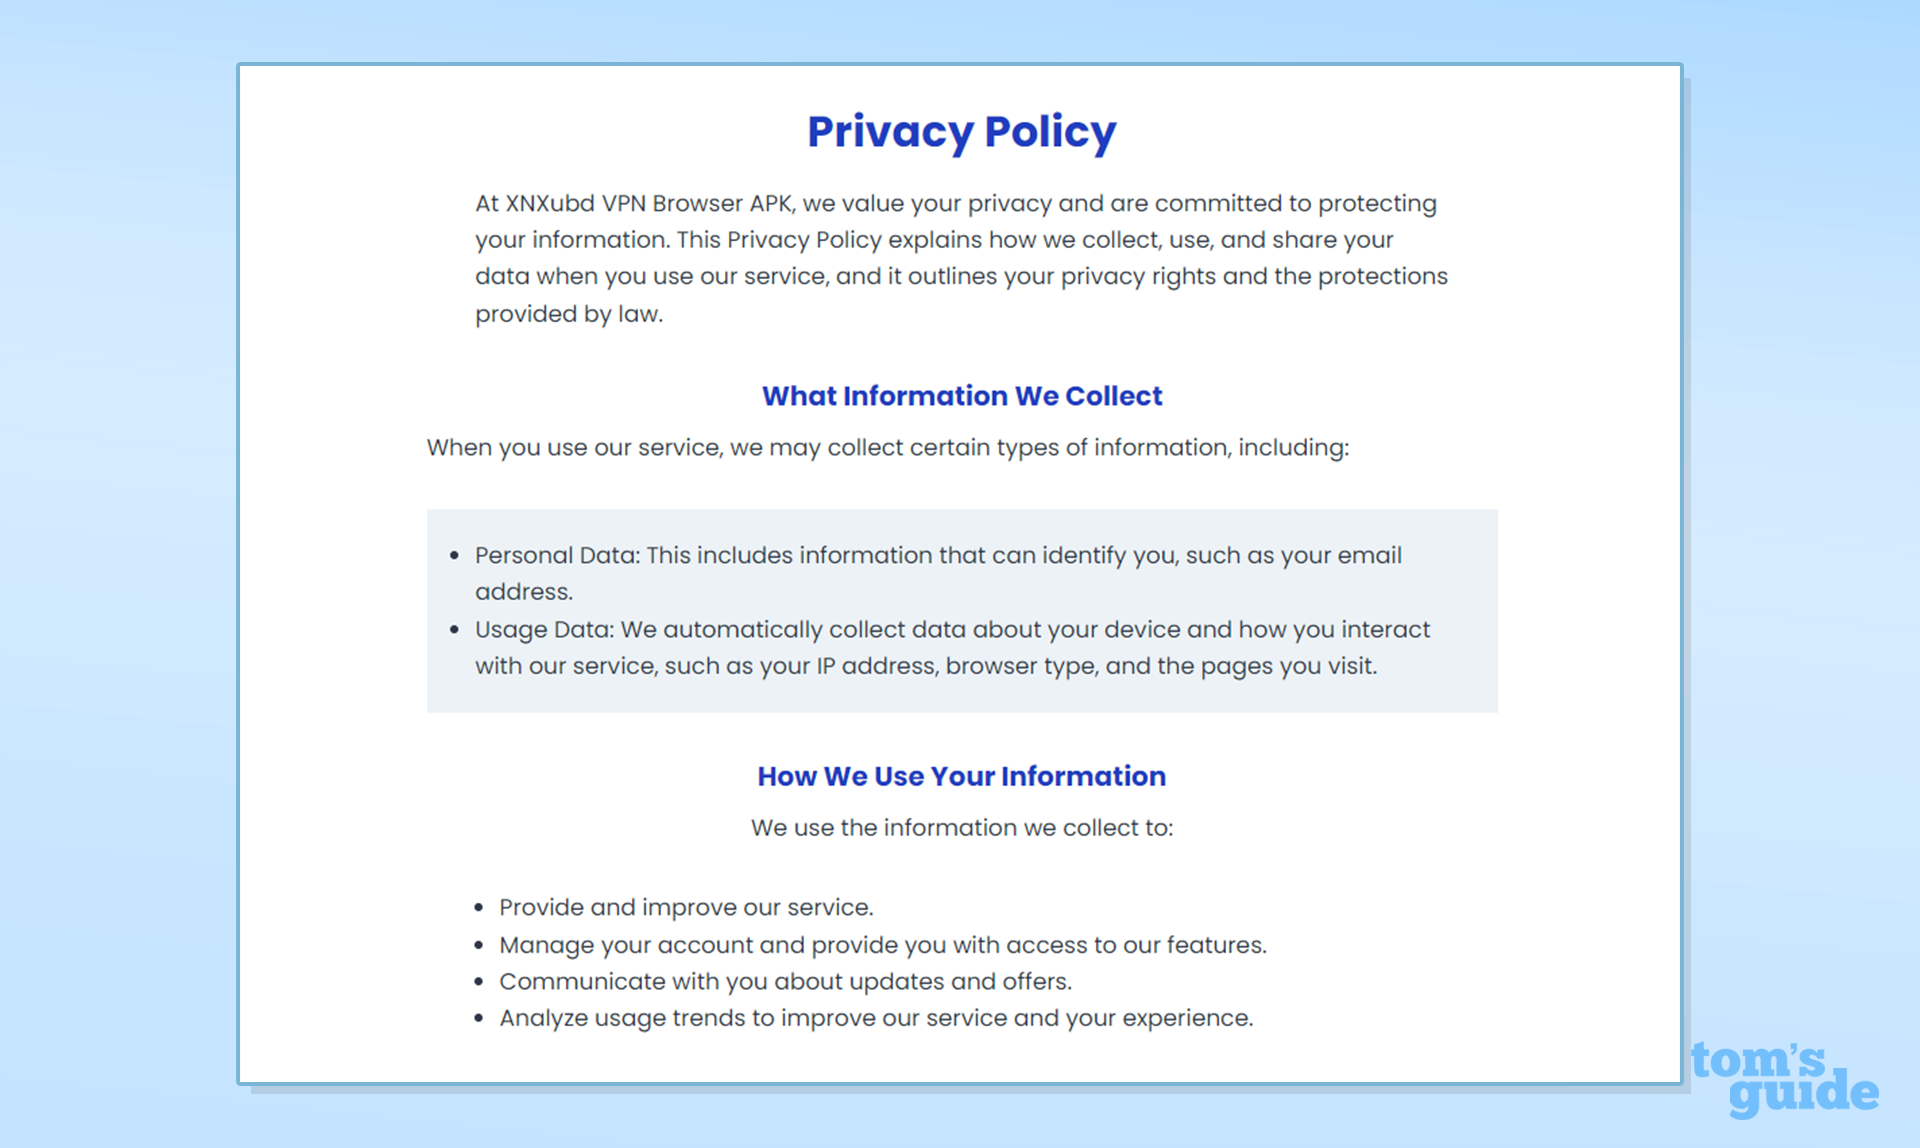 XNXubd's privacy policy